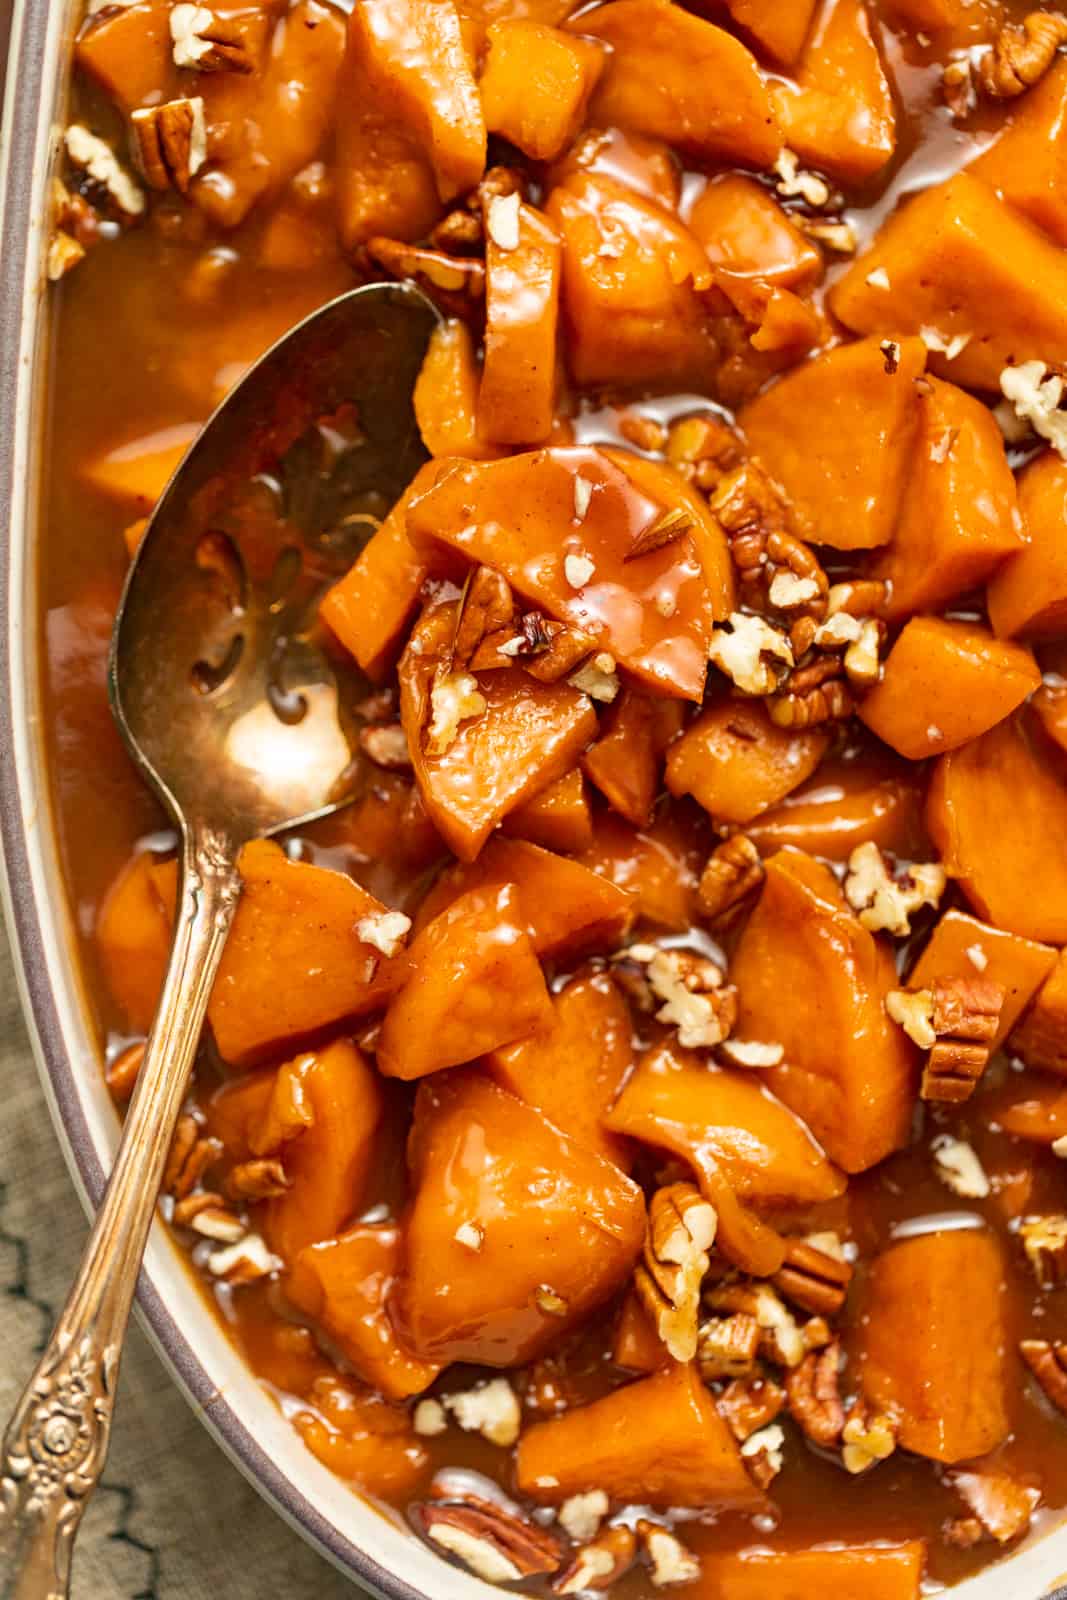 candied sweet potatoes in a casserole dish with a serving spoon.